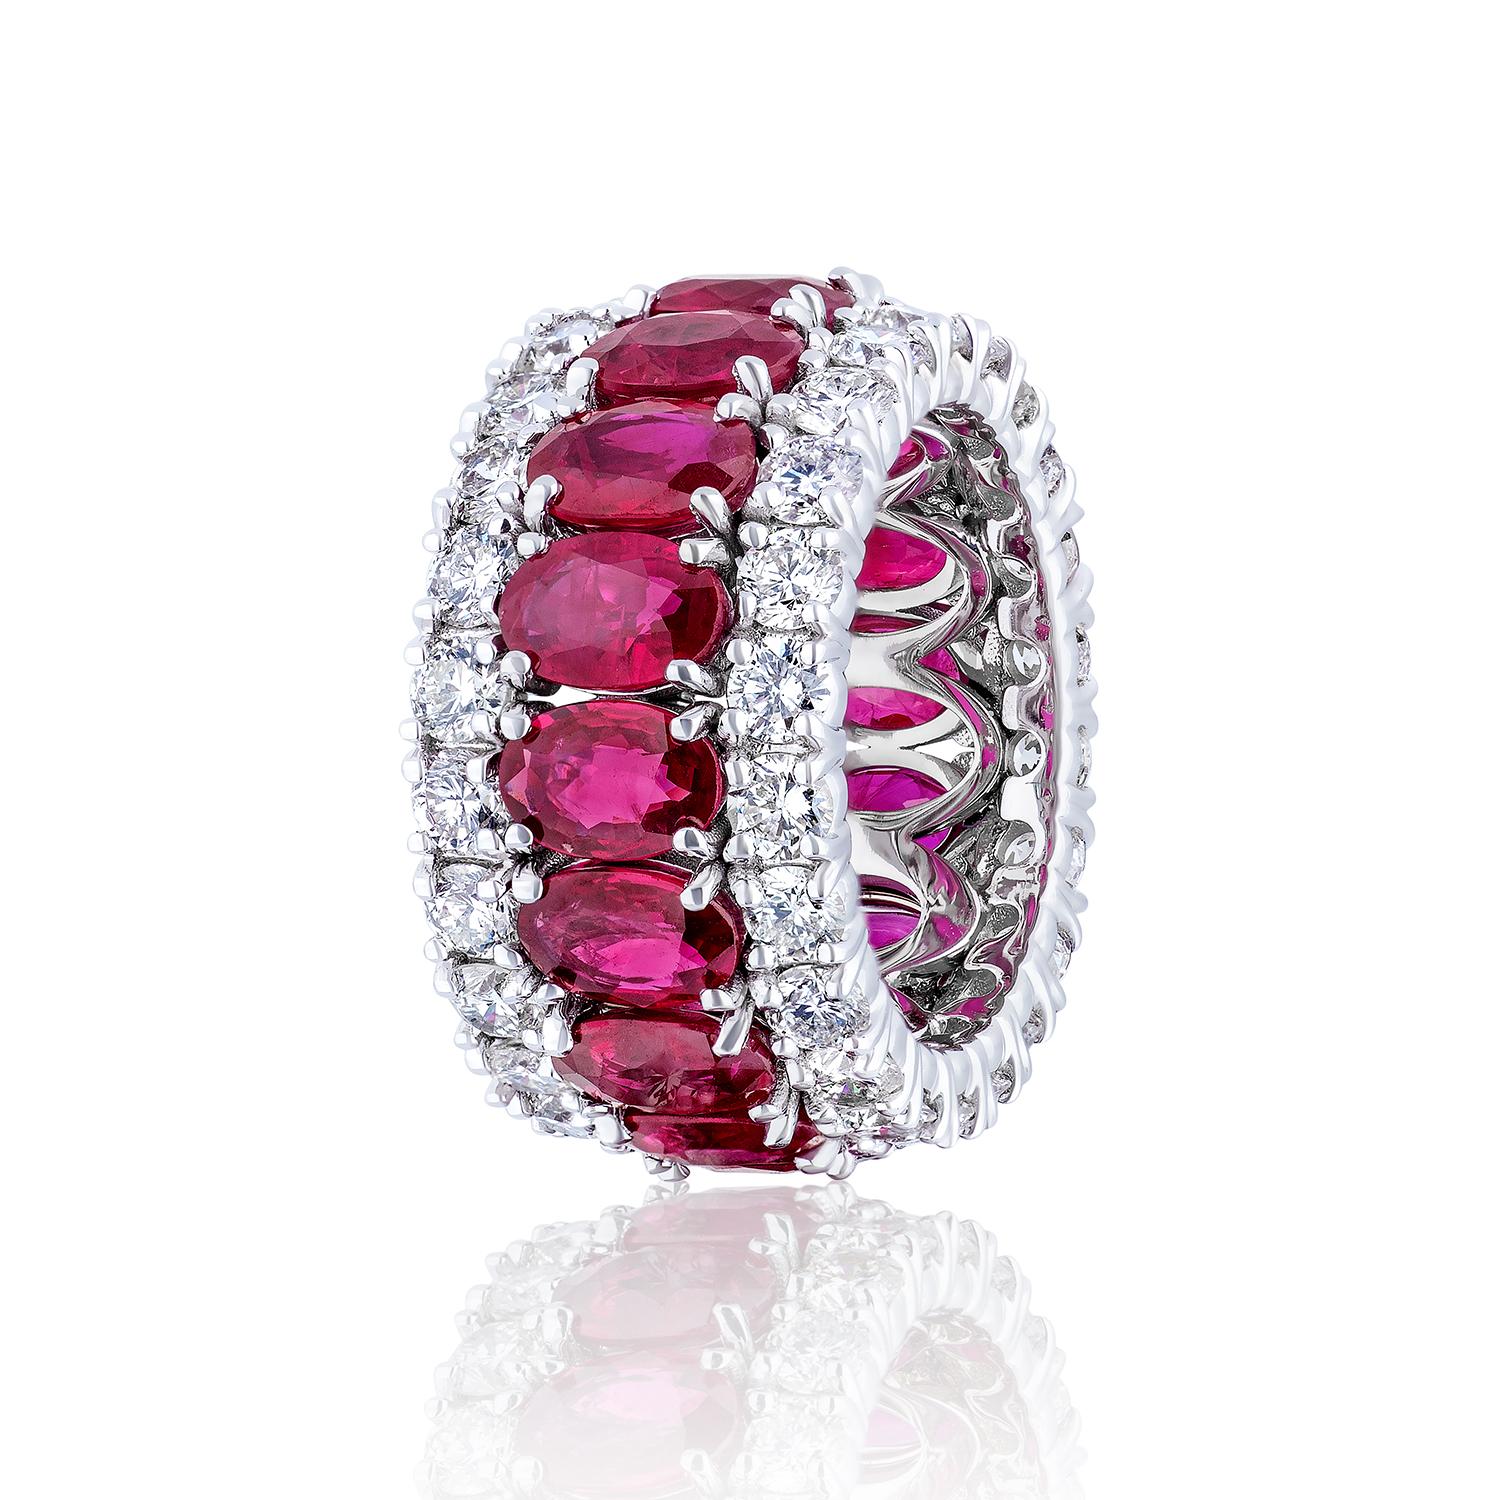 16 Gorgeous Red Rubies weighing 8.82 Carats and 44 Round Diamonds weighing 3.72 Carats.

Set in 18 Karat White Gold.

Also available in Blue Sapphire and Pink Sapphire